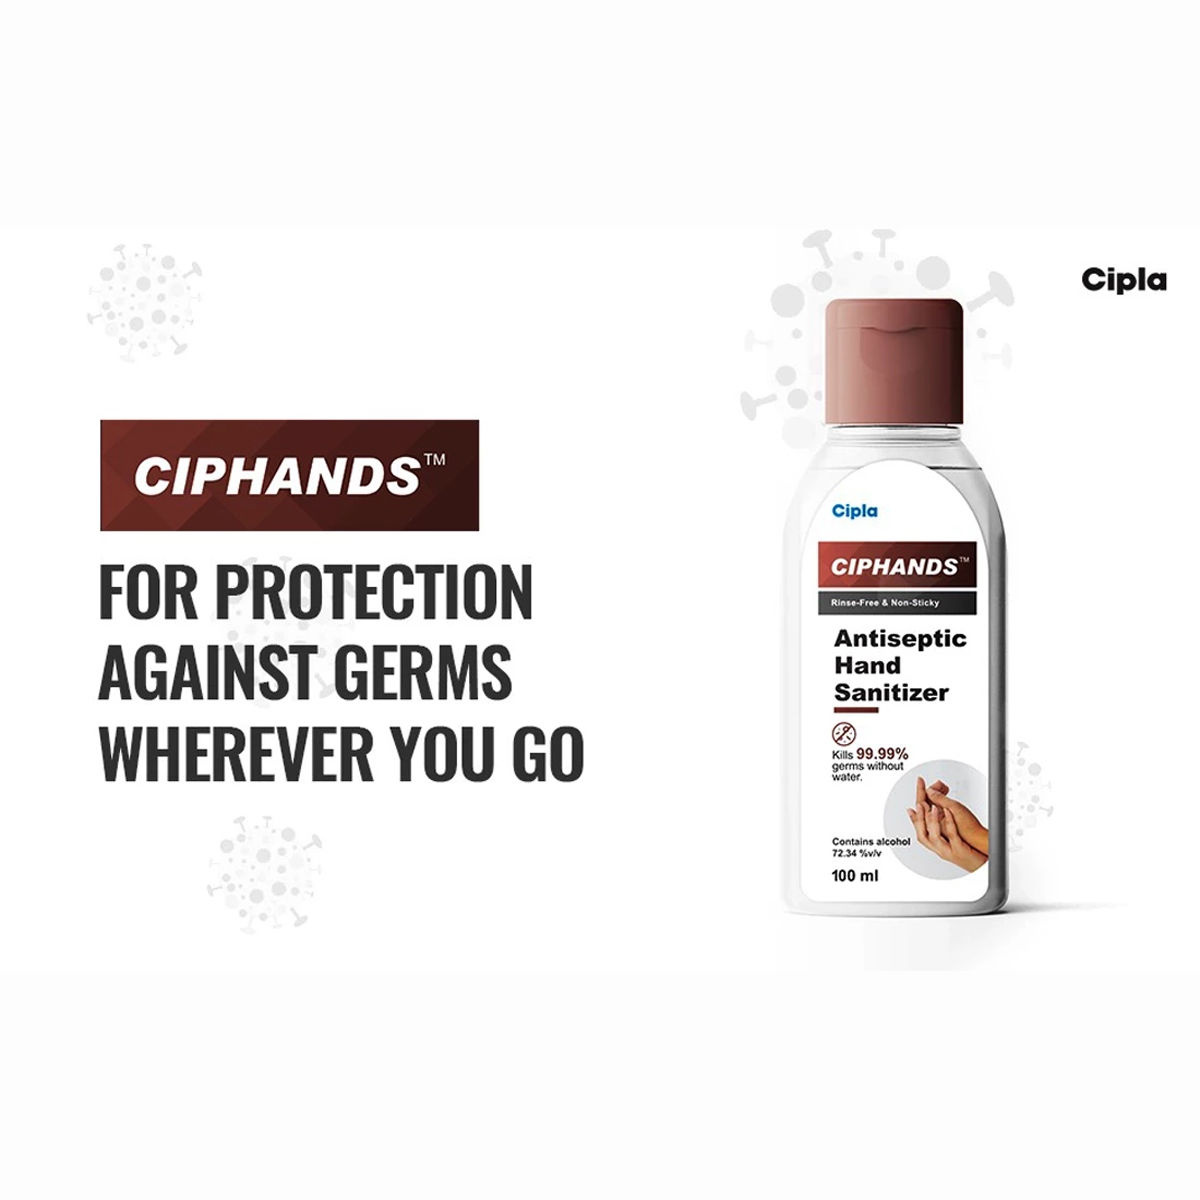 Ciphands Antiseptic Hand Sanitizer, 100 ml, Pack of 1 